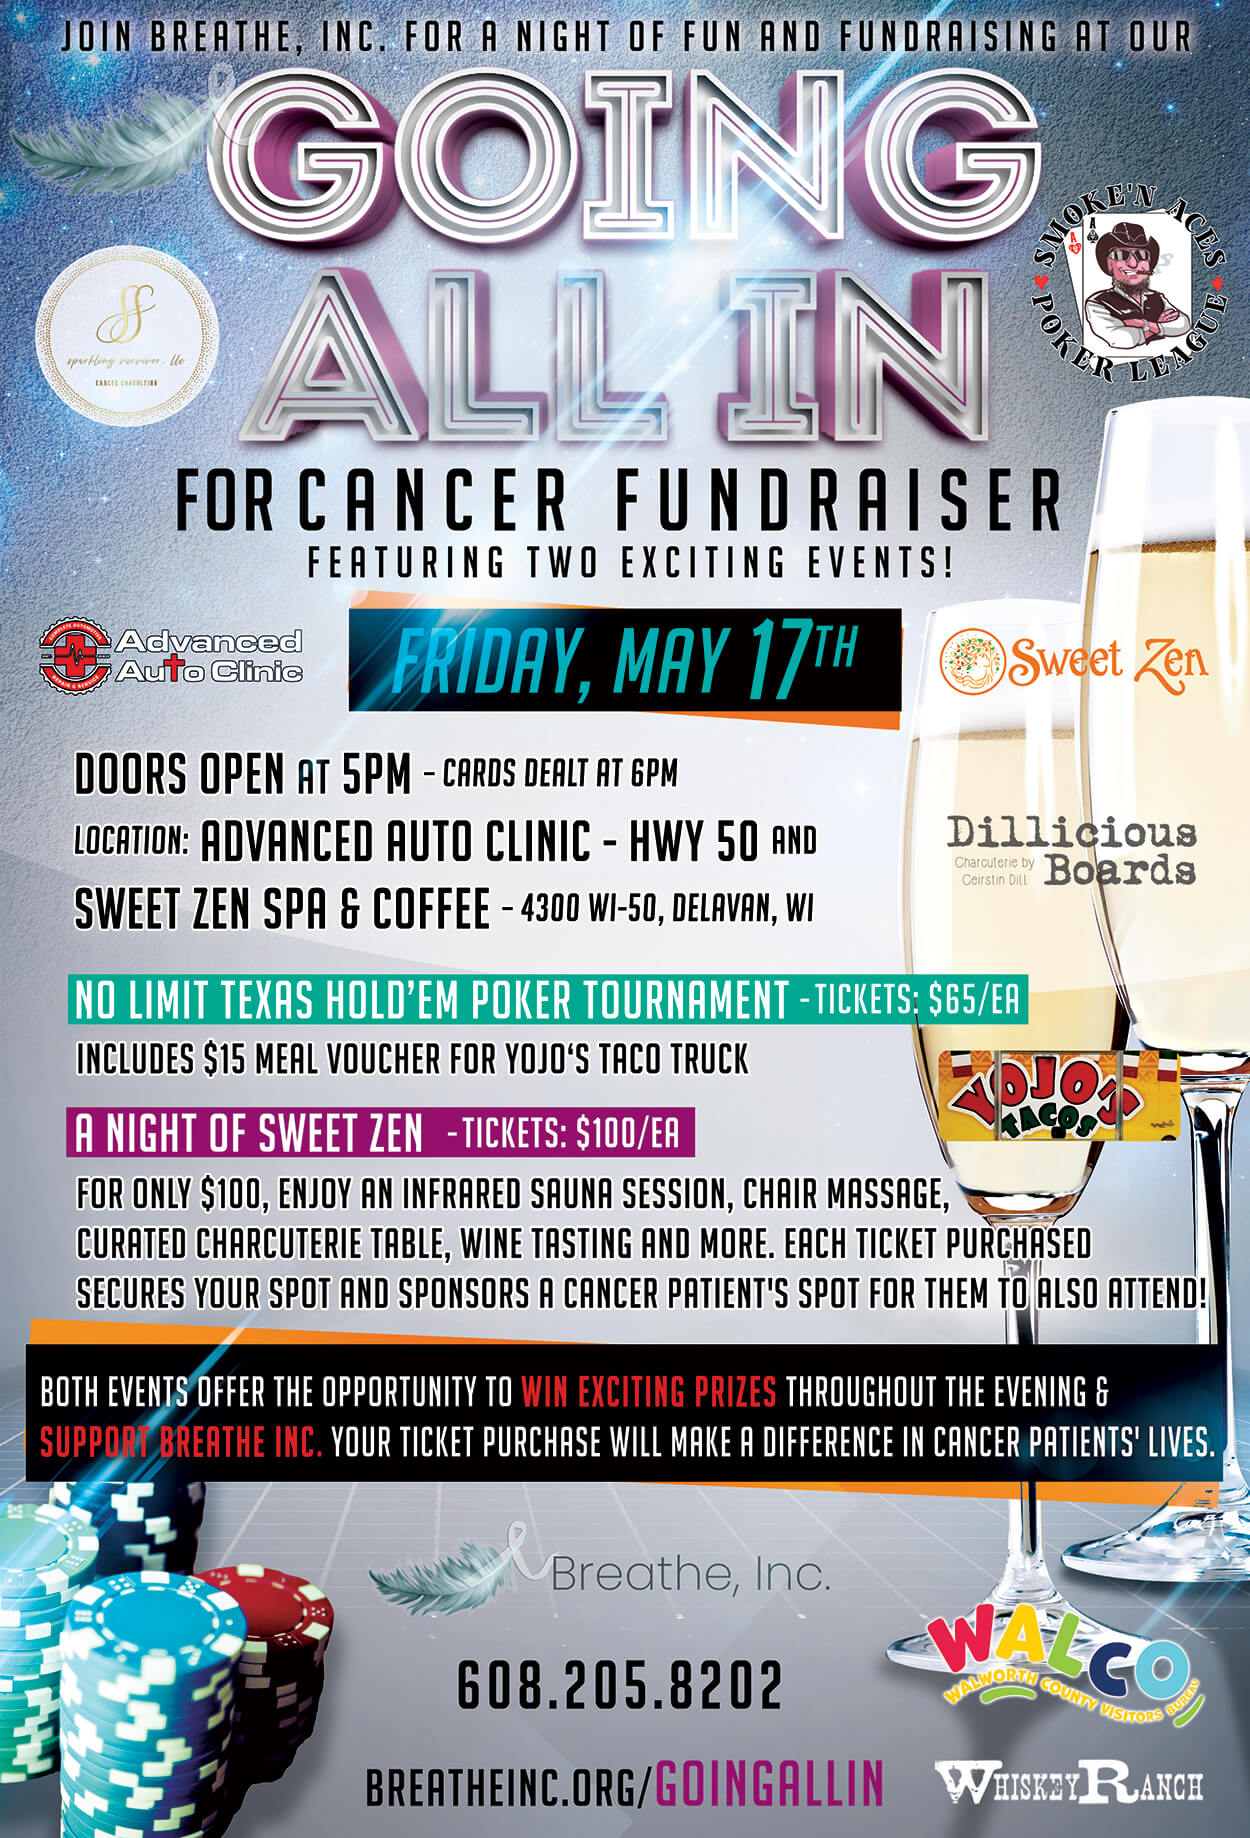 GOING ALL IN‘ for Cancer Fundraiser featuring Two Exciting Events!